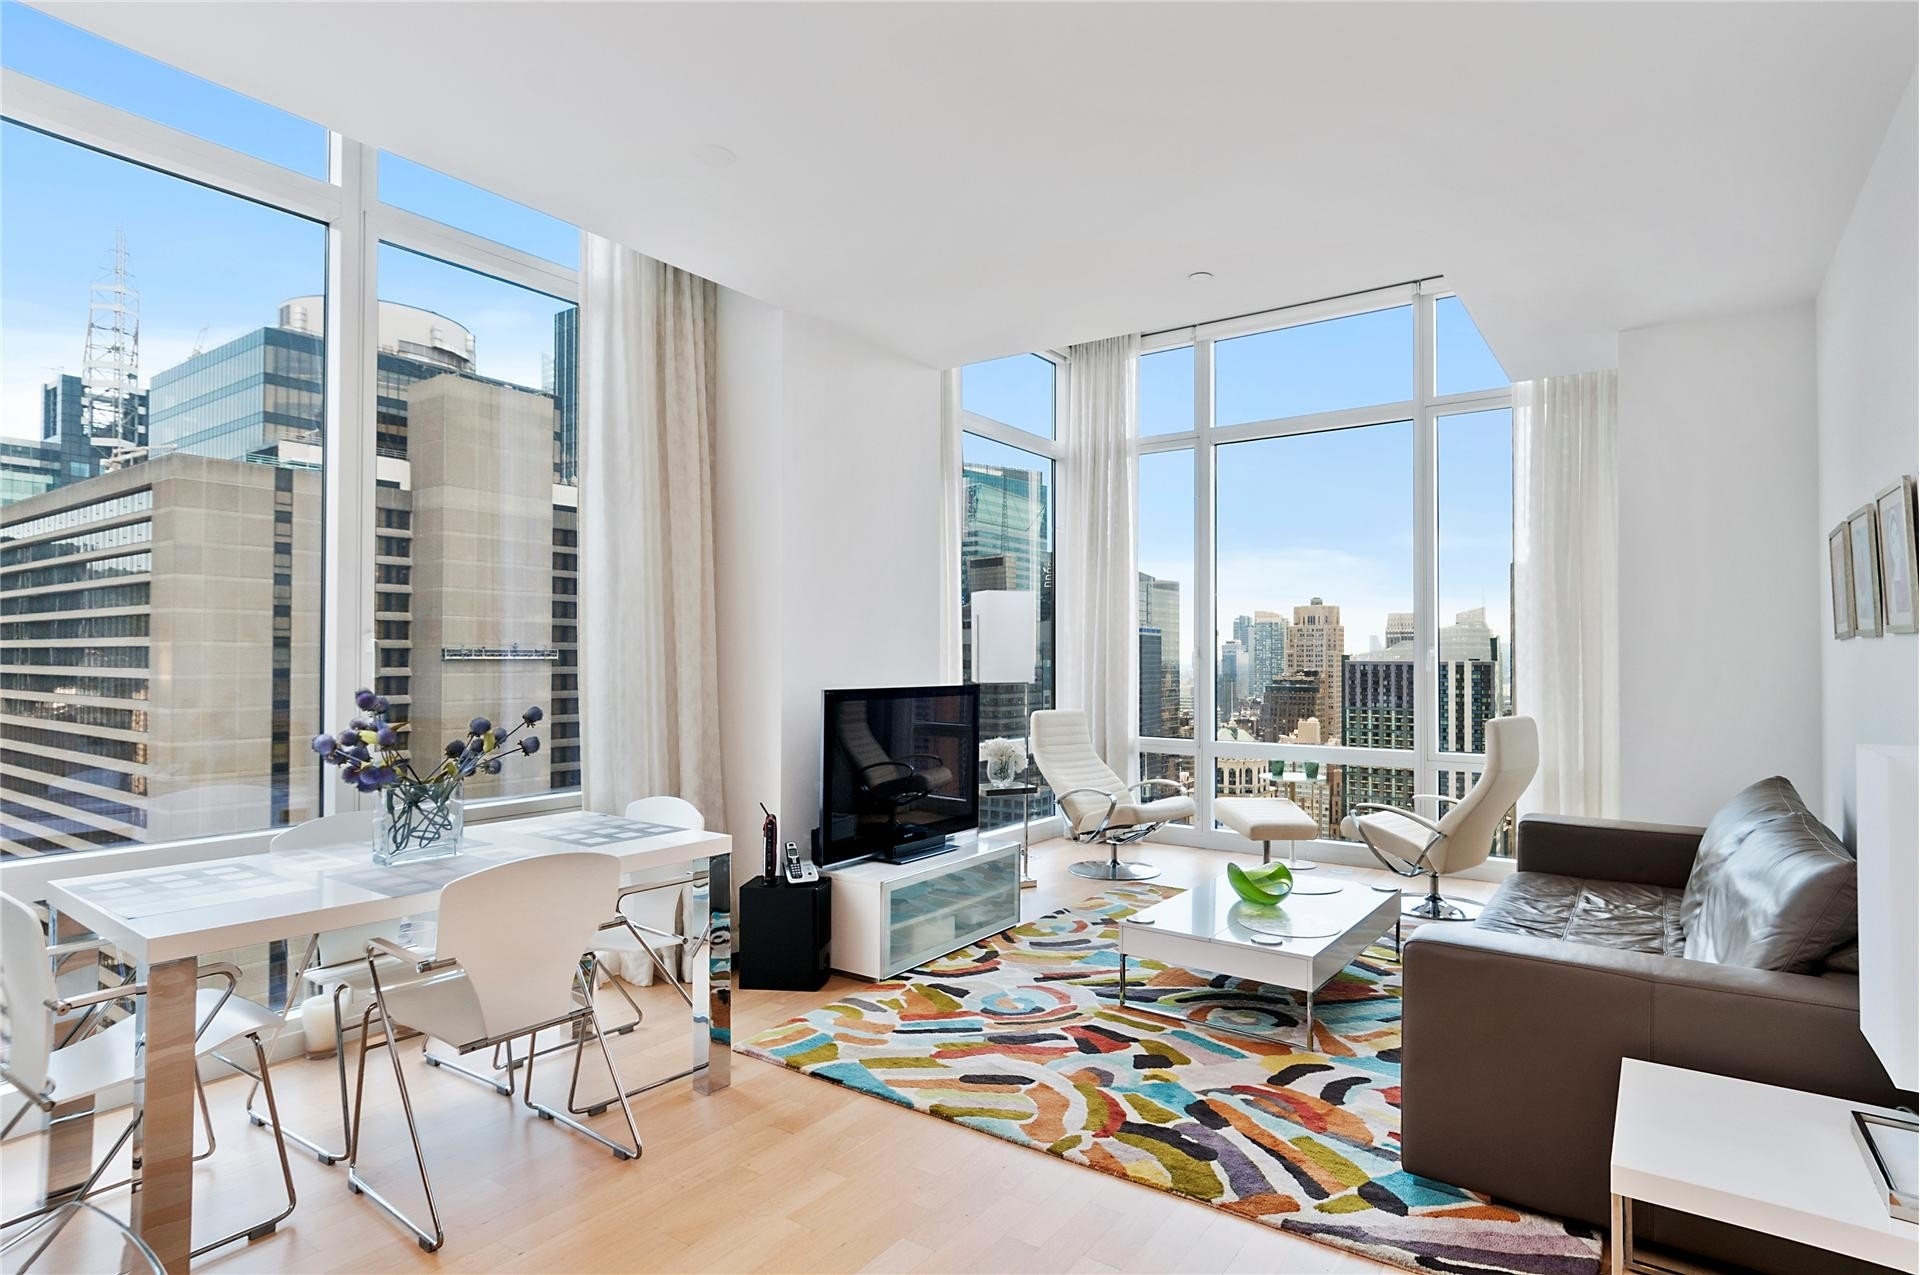 Property at Platinum, 247 West 46th St, 4203 New York